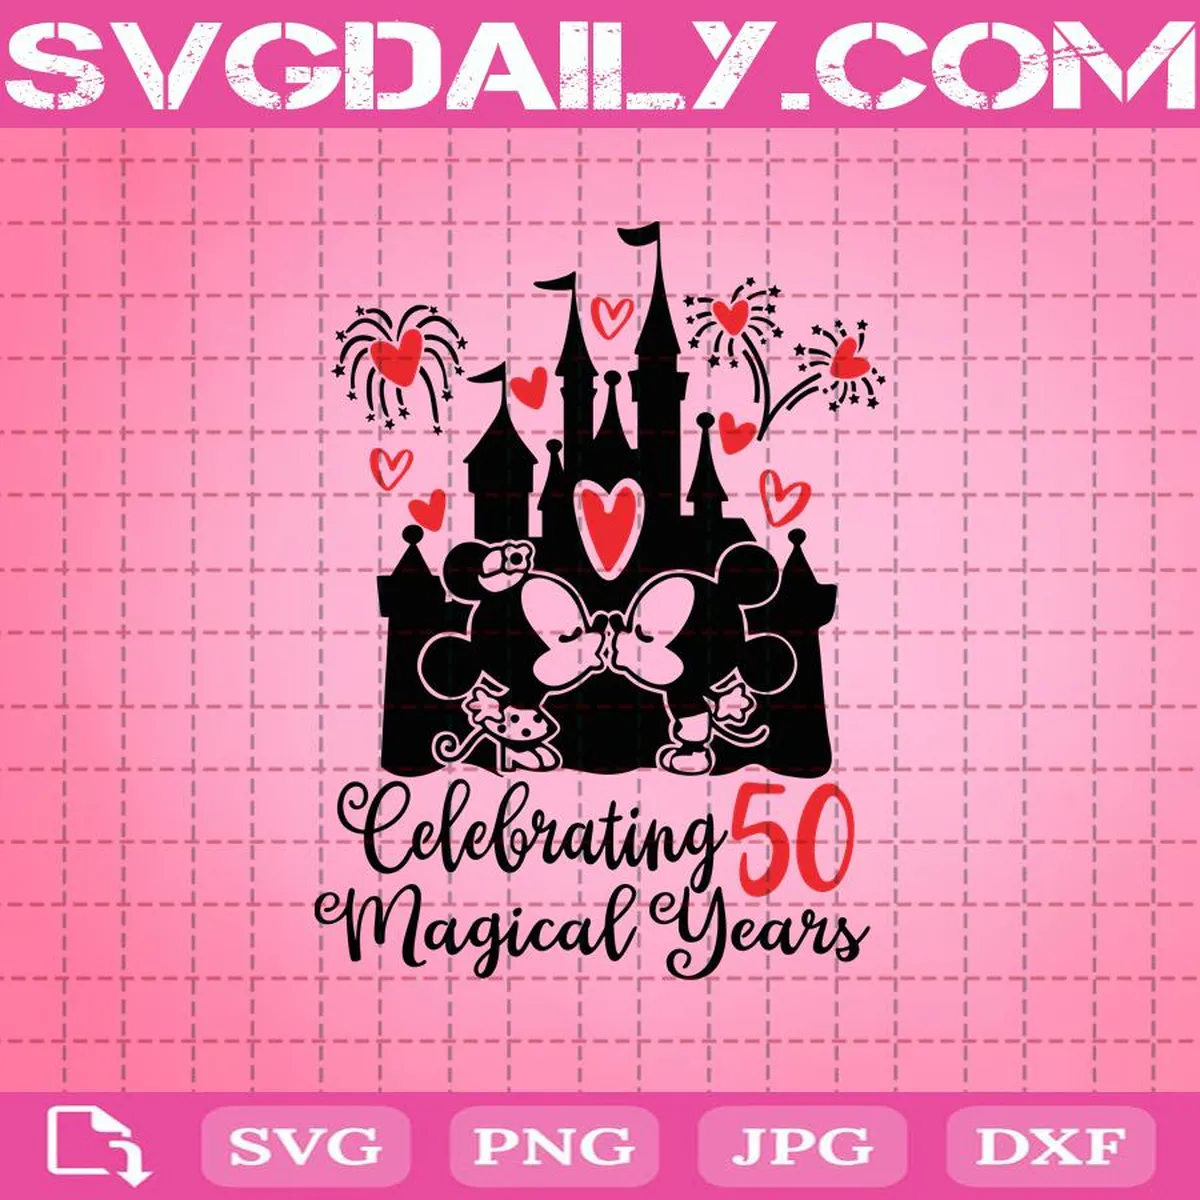 Celebrating 50 Magical Years Svg, Happily Ever After Svg, Disney Svg, Mickey Svg, Minnie Svg, Inspired By Mickey Mouse Svg, 50th Anniversary Celebration Svg